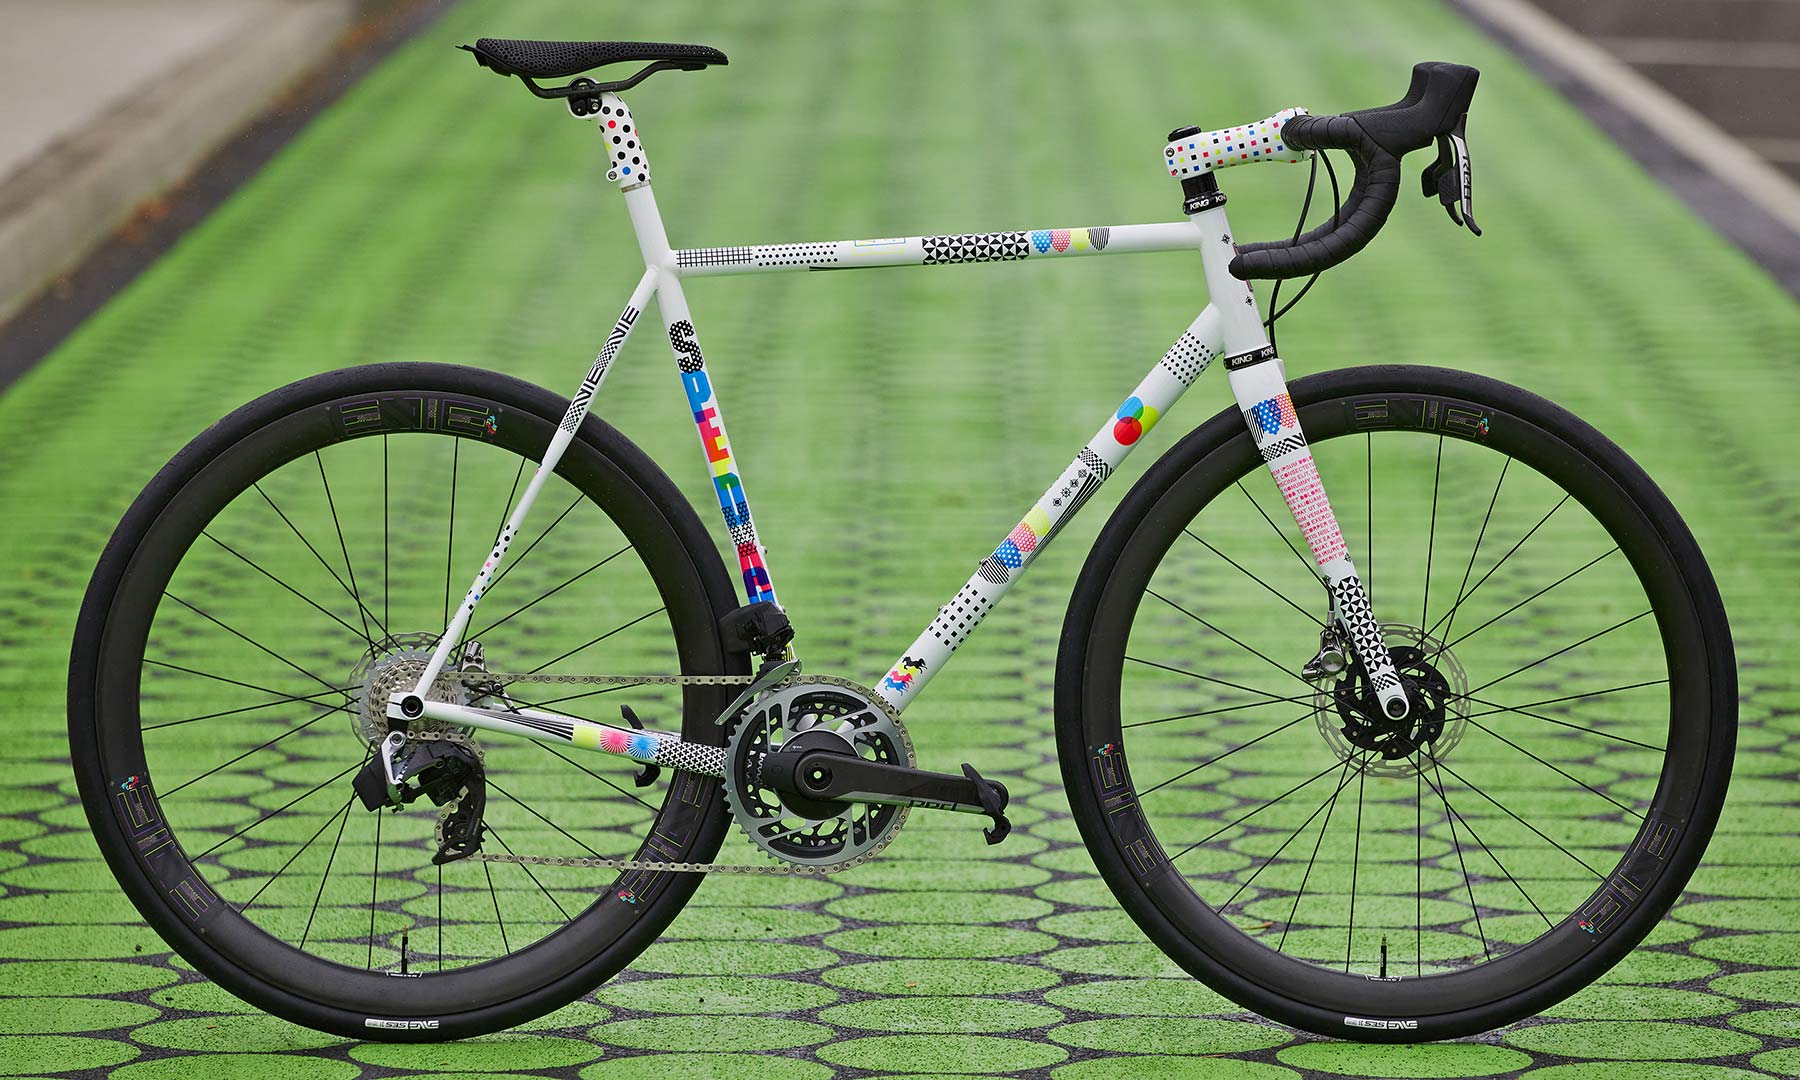 2021-2022 Speedvagen Surprise Me series, full-custom Vanilla workshop road bike with surprise paintjob inspired by printers proofs, The Painters Proof CMYK edition complete